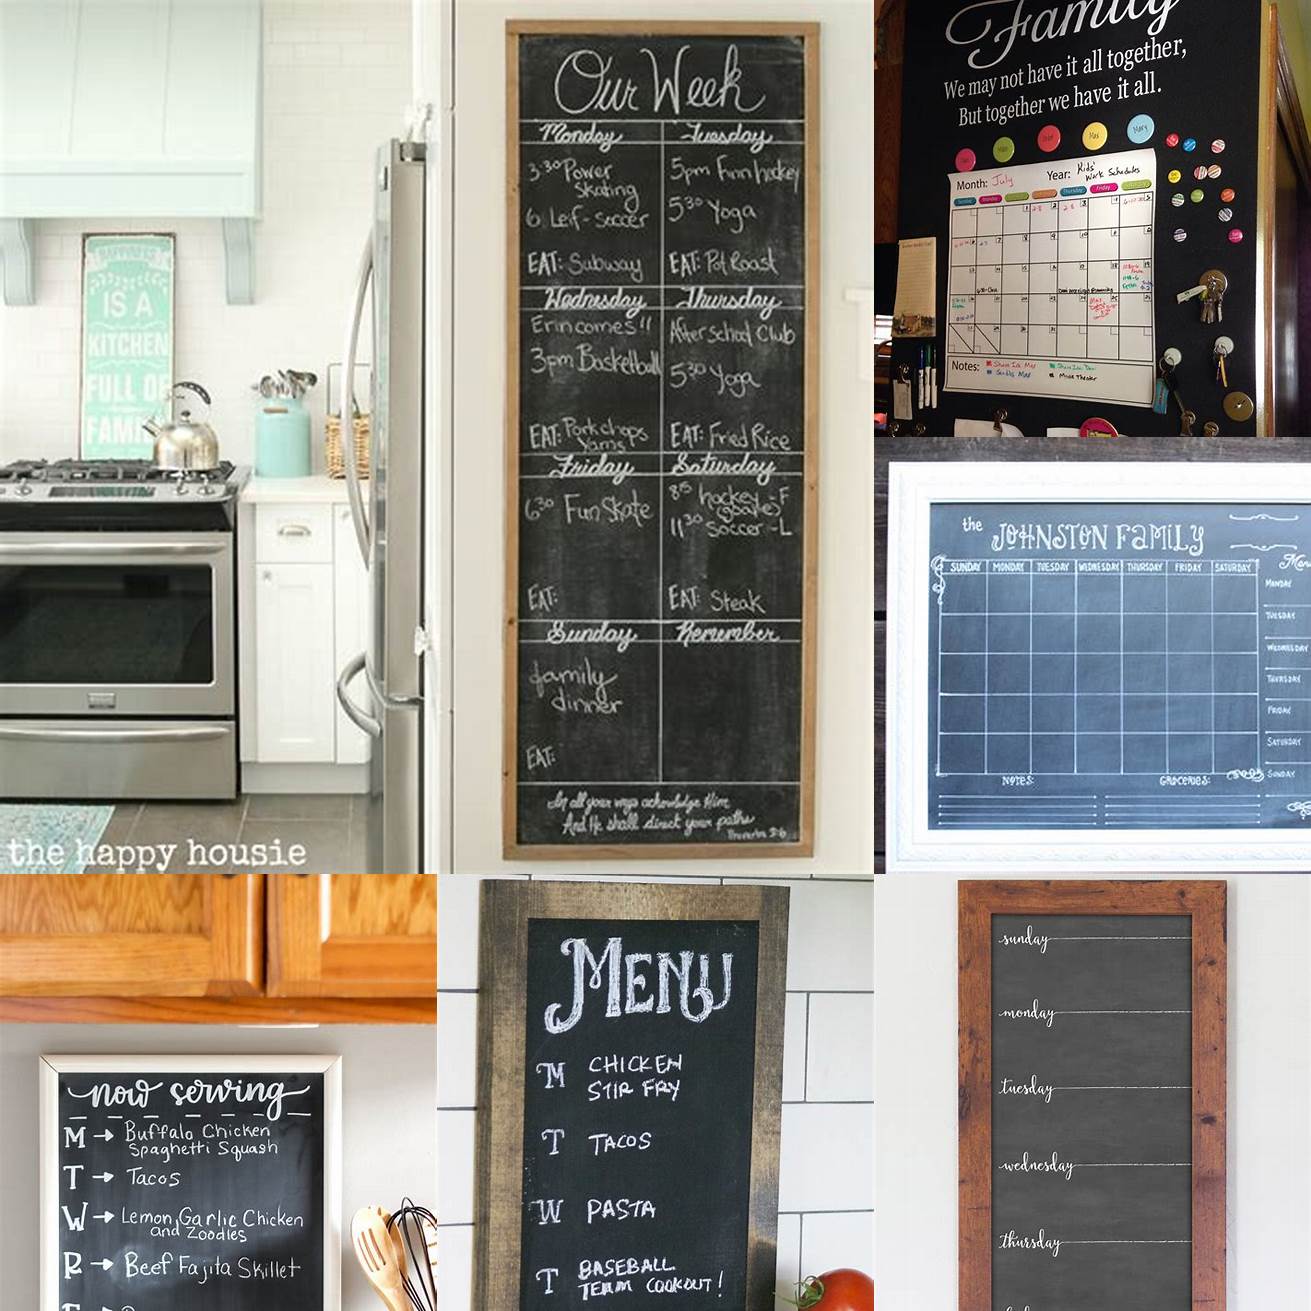 3 Family Schedule The kitchen chalkboard is a great way to keep track of important dates and events for the family You can write down birthdays appointments and other events so that everyone is on the same page